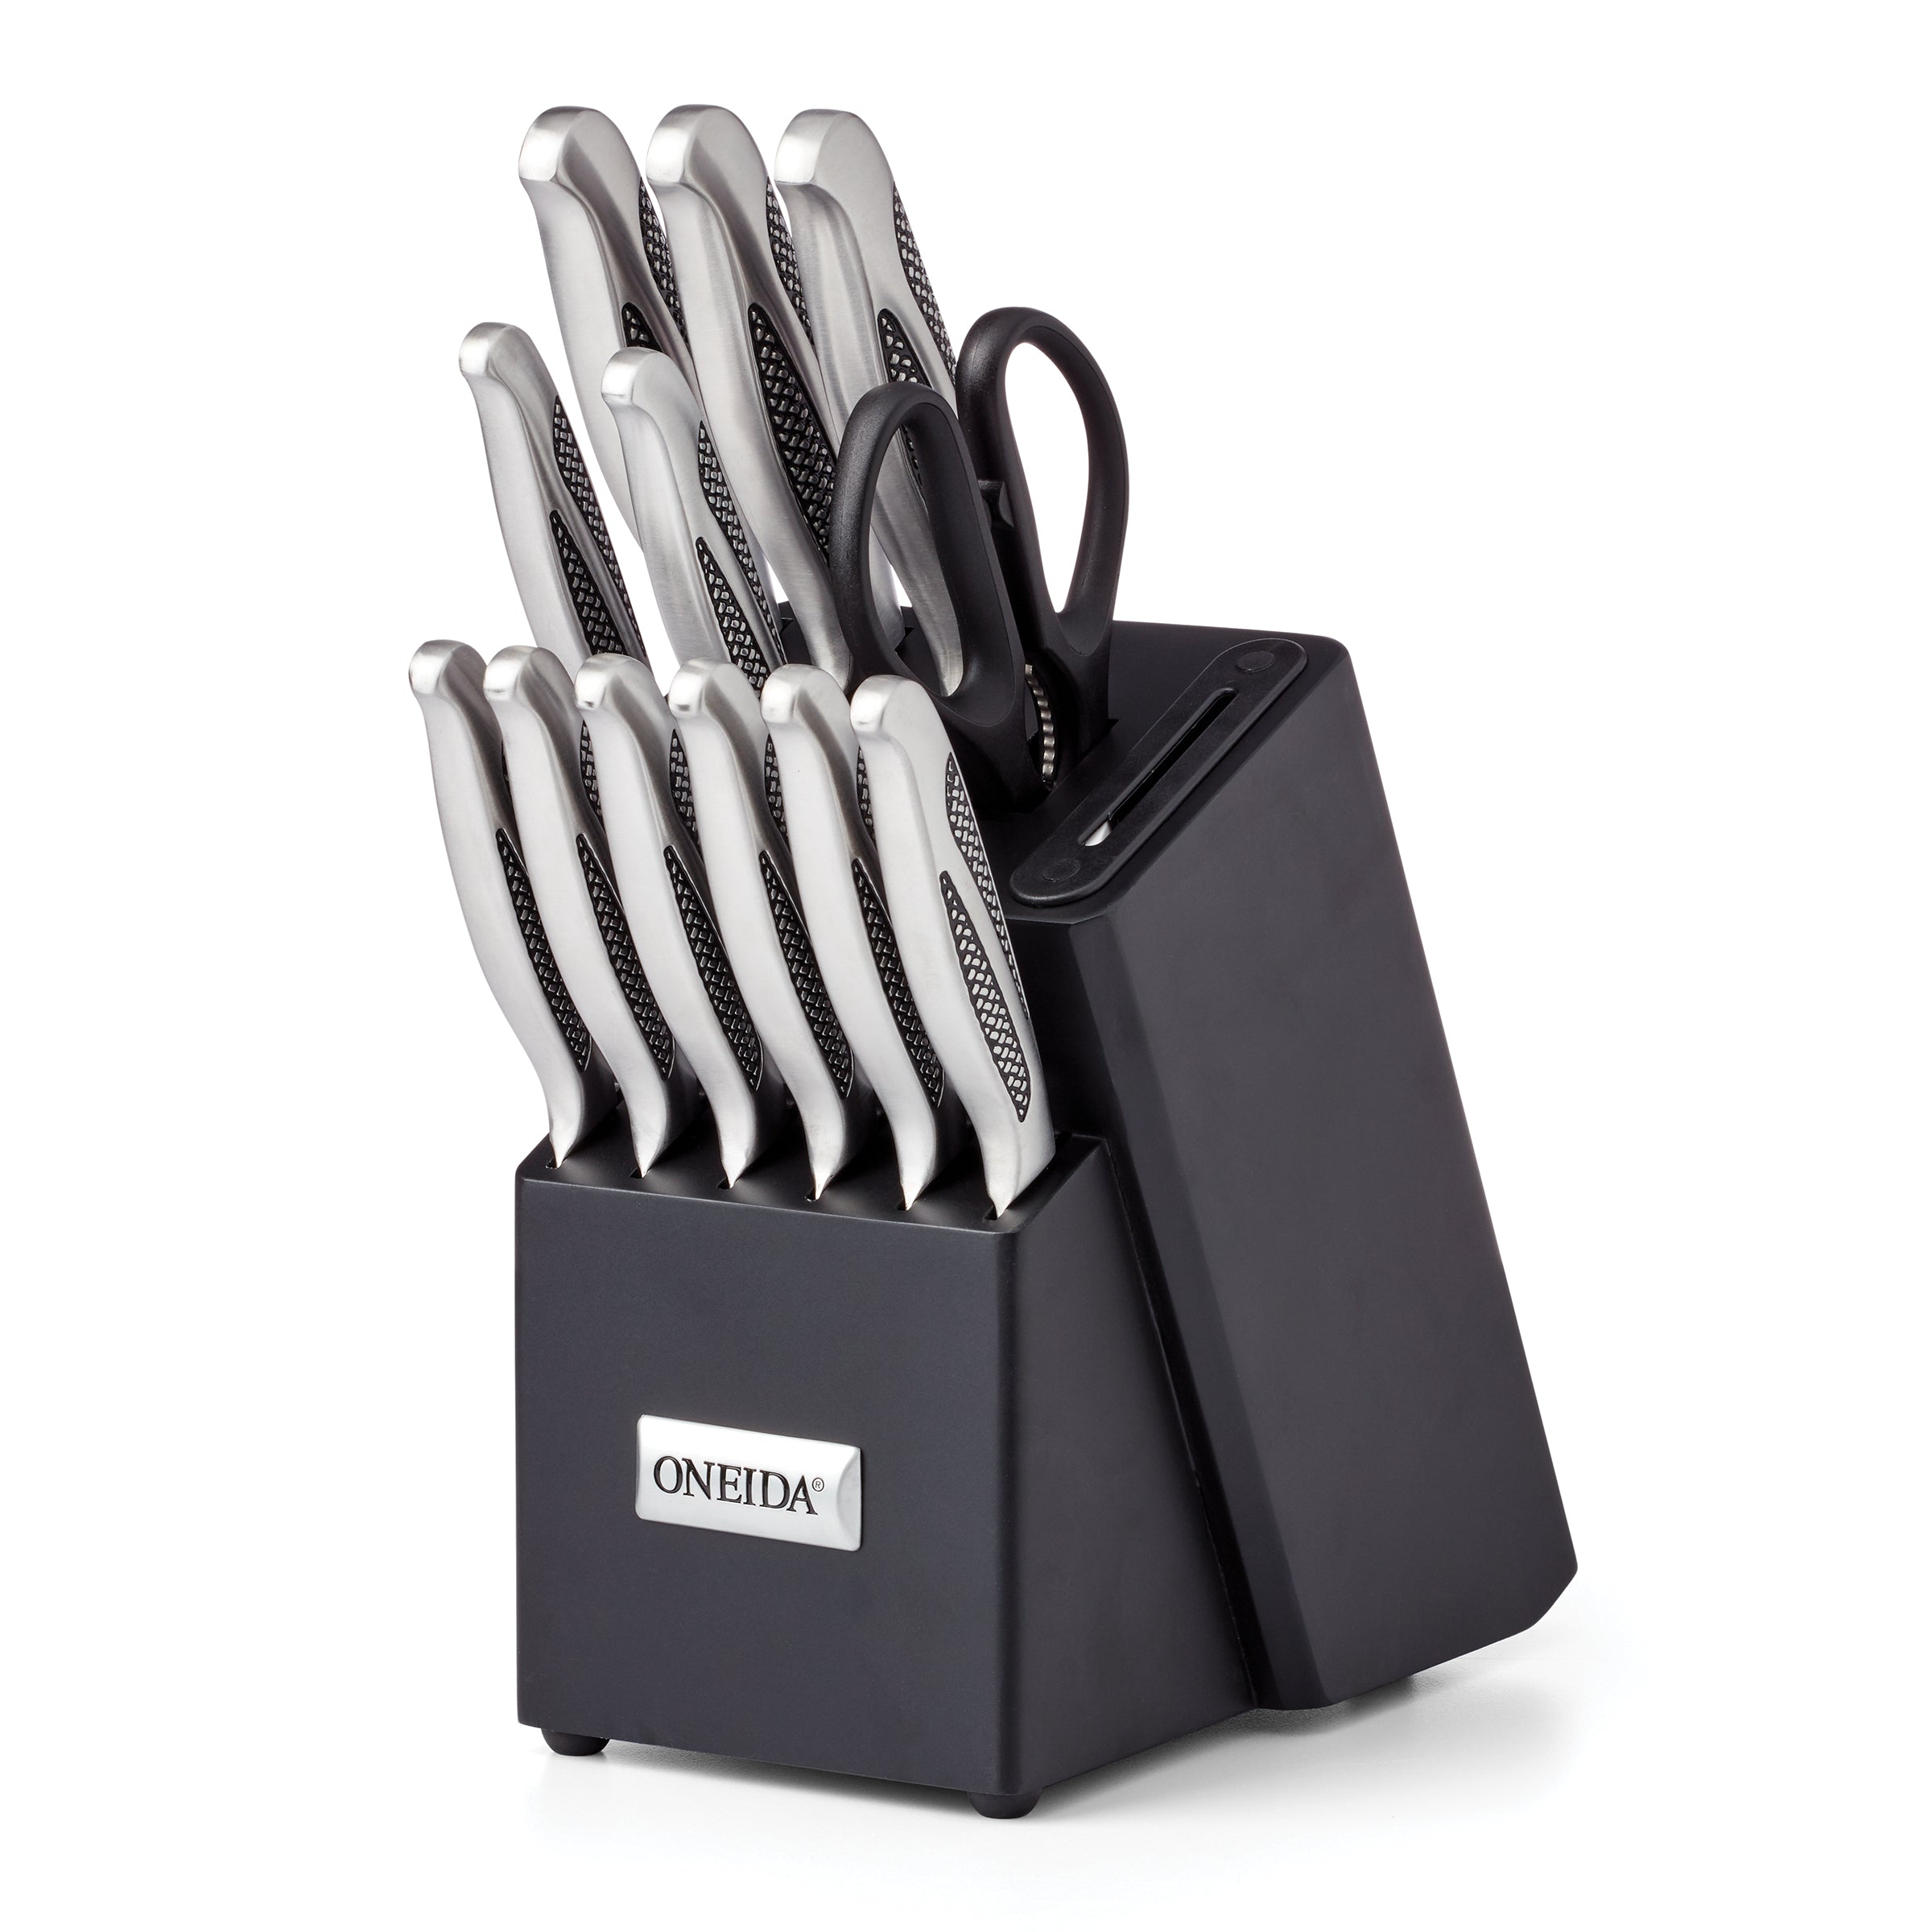 Farberware 23-Pc. Cutlery and Tool Set | Blue | One Size | Cutlery Knife Sets | Dishwasher Safe